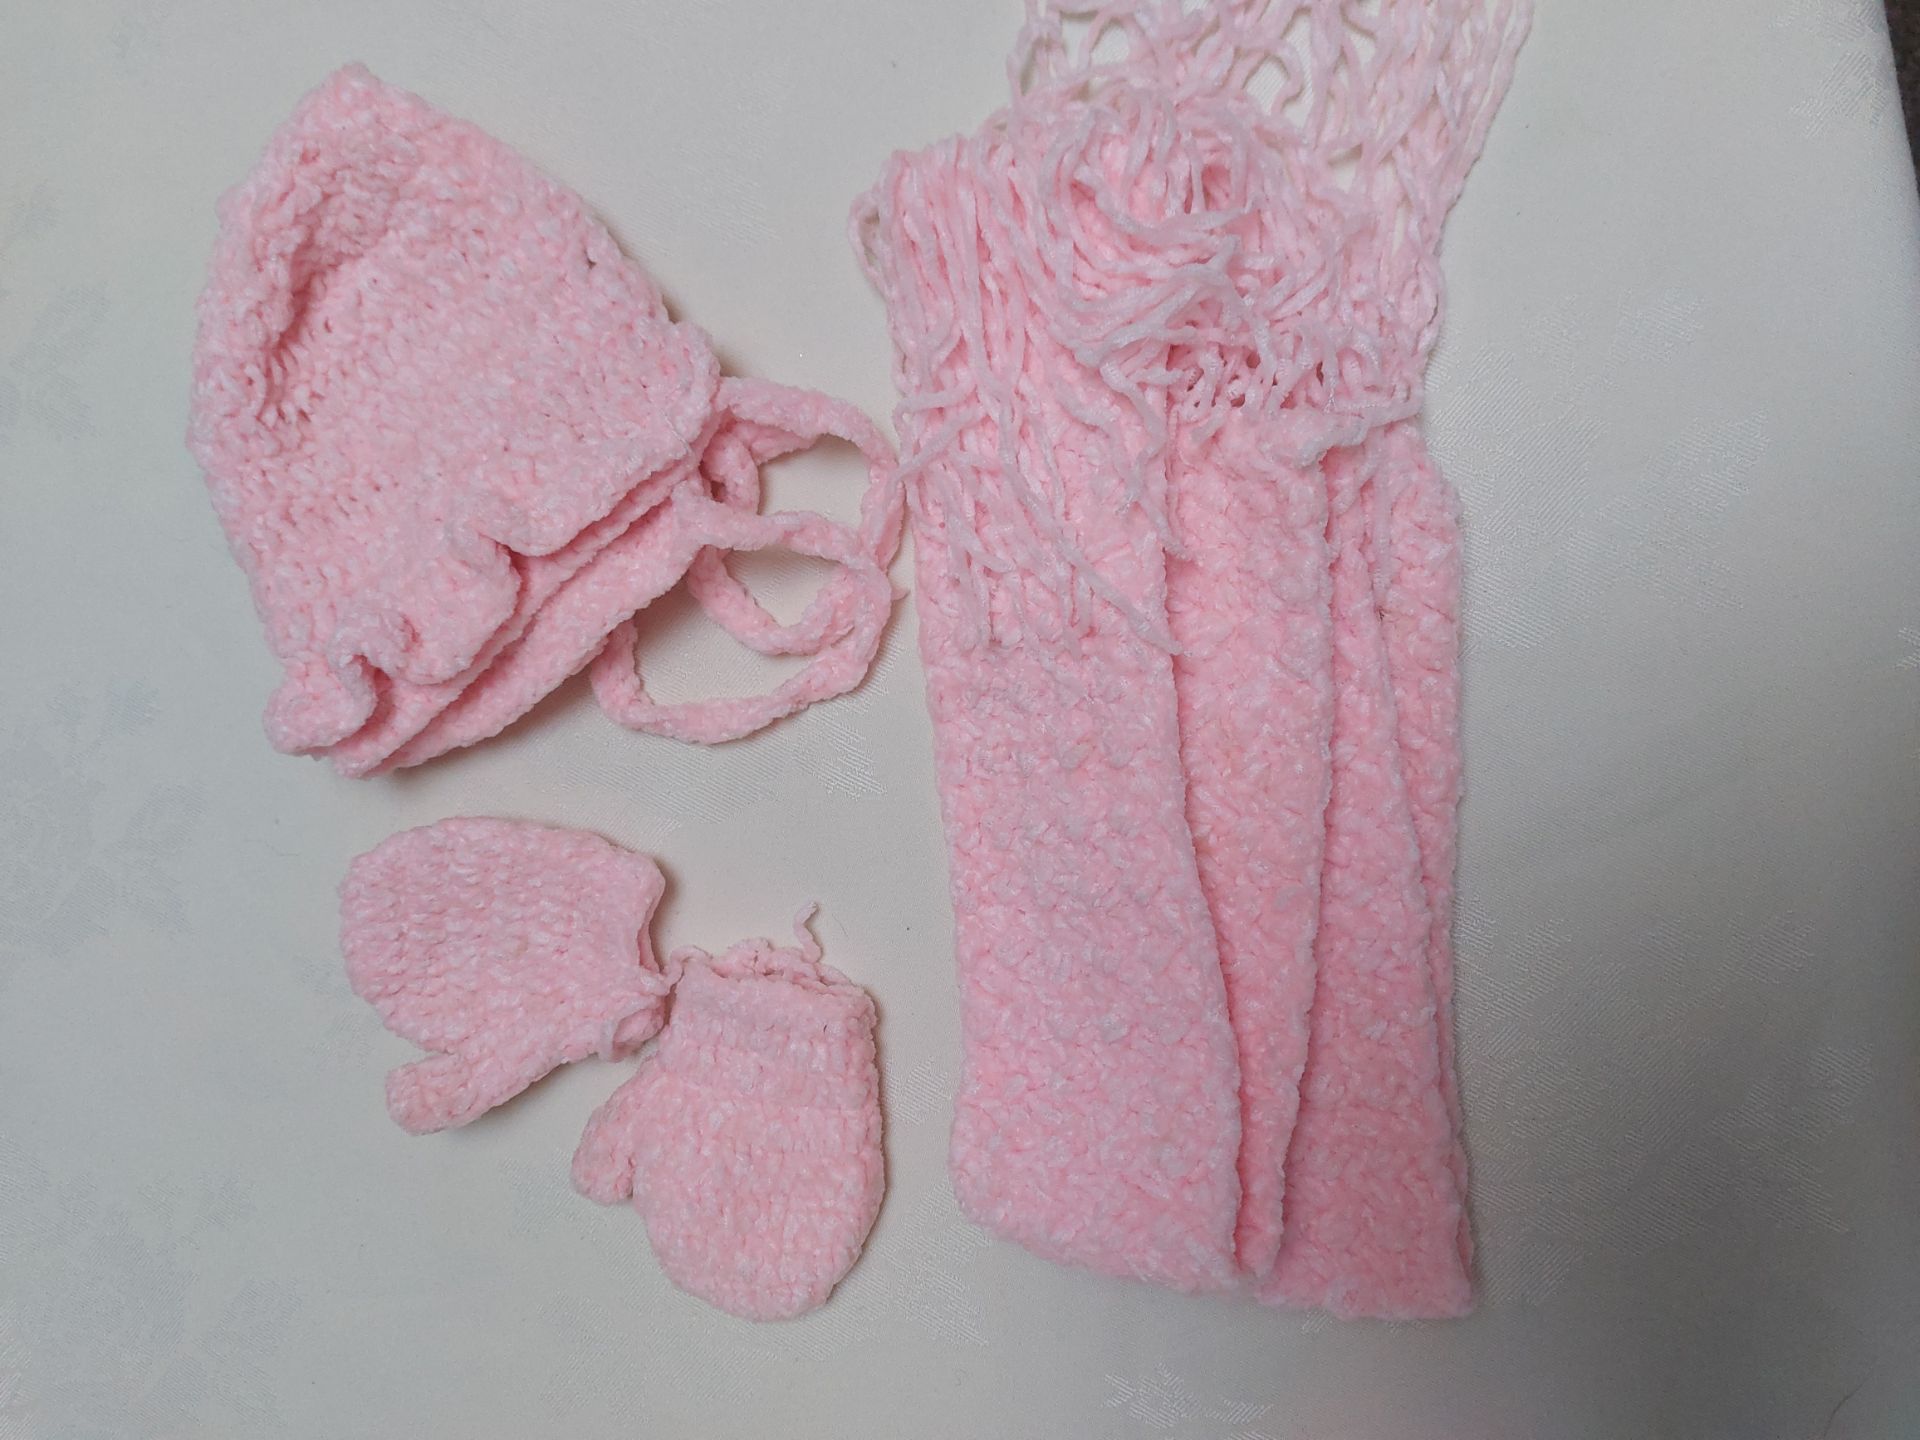 Pink and Blue Hats, Scarves and Gloves - Min 15 Items